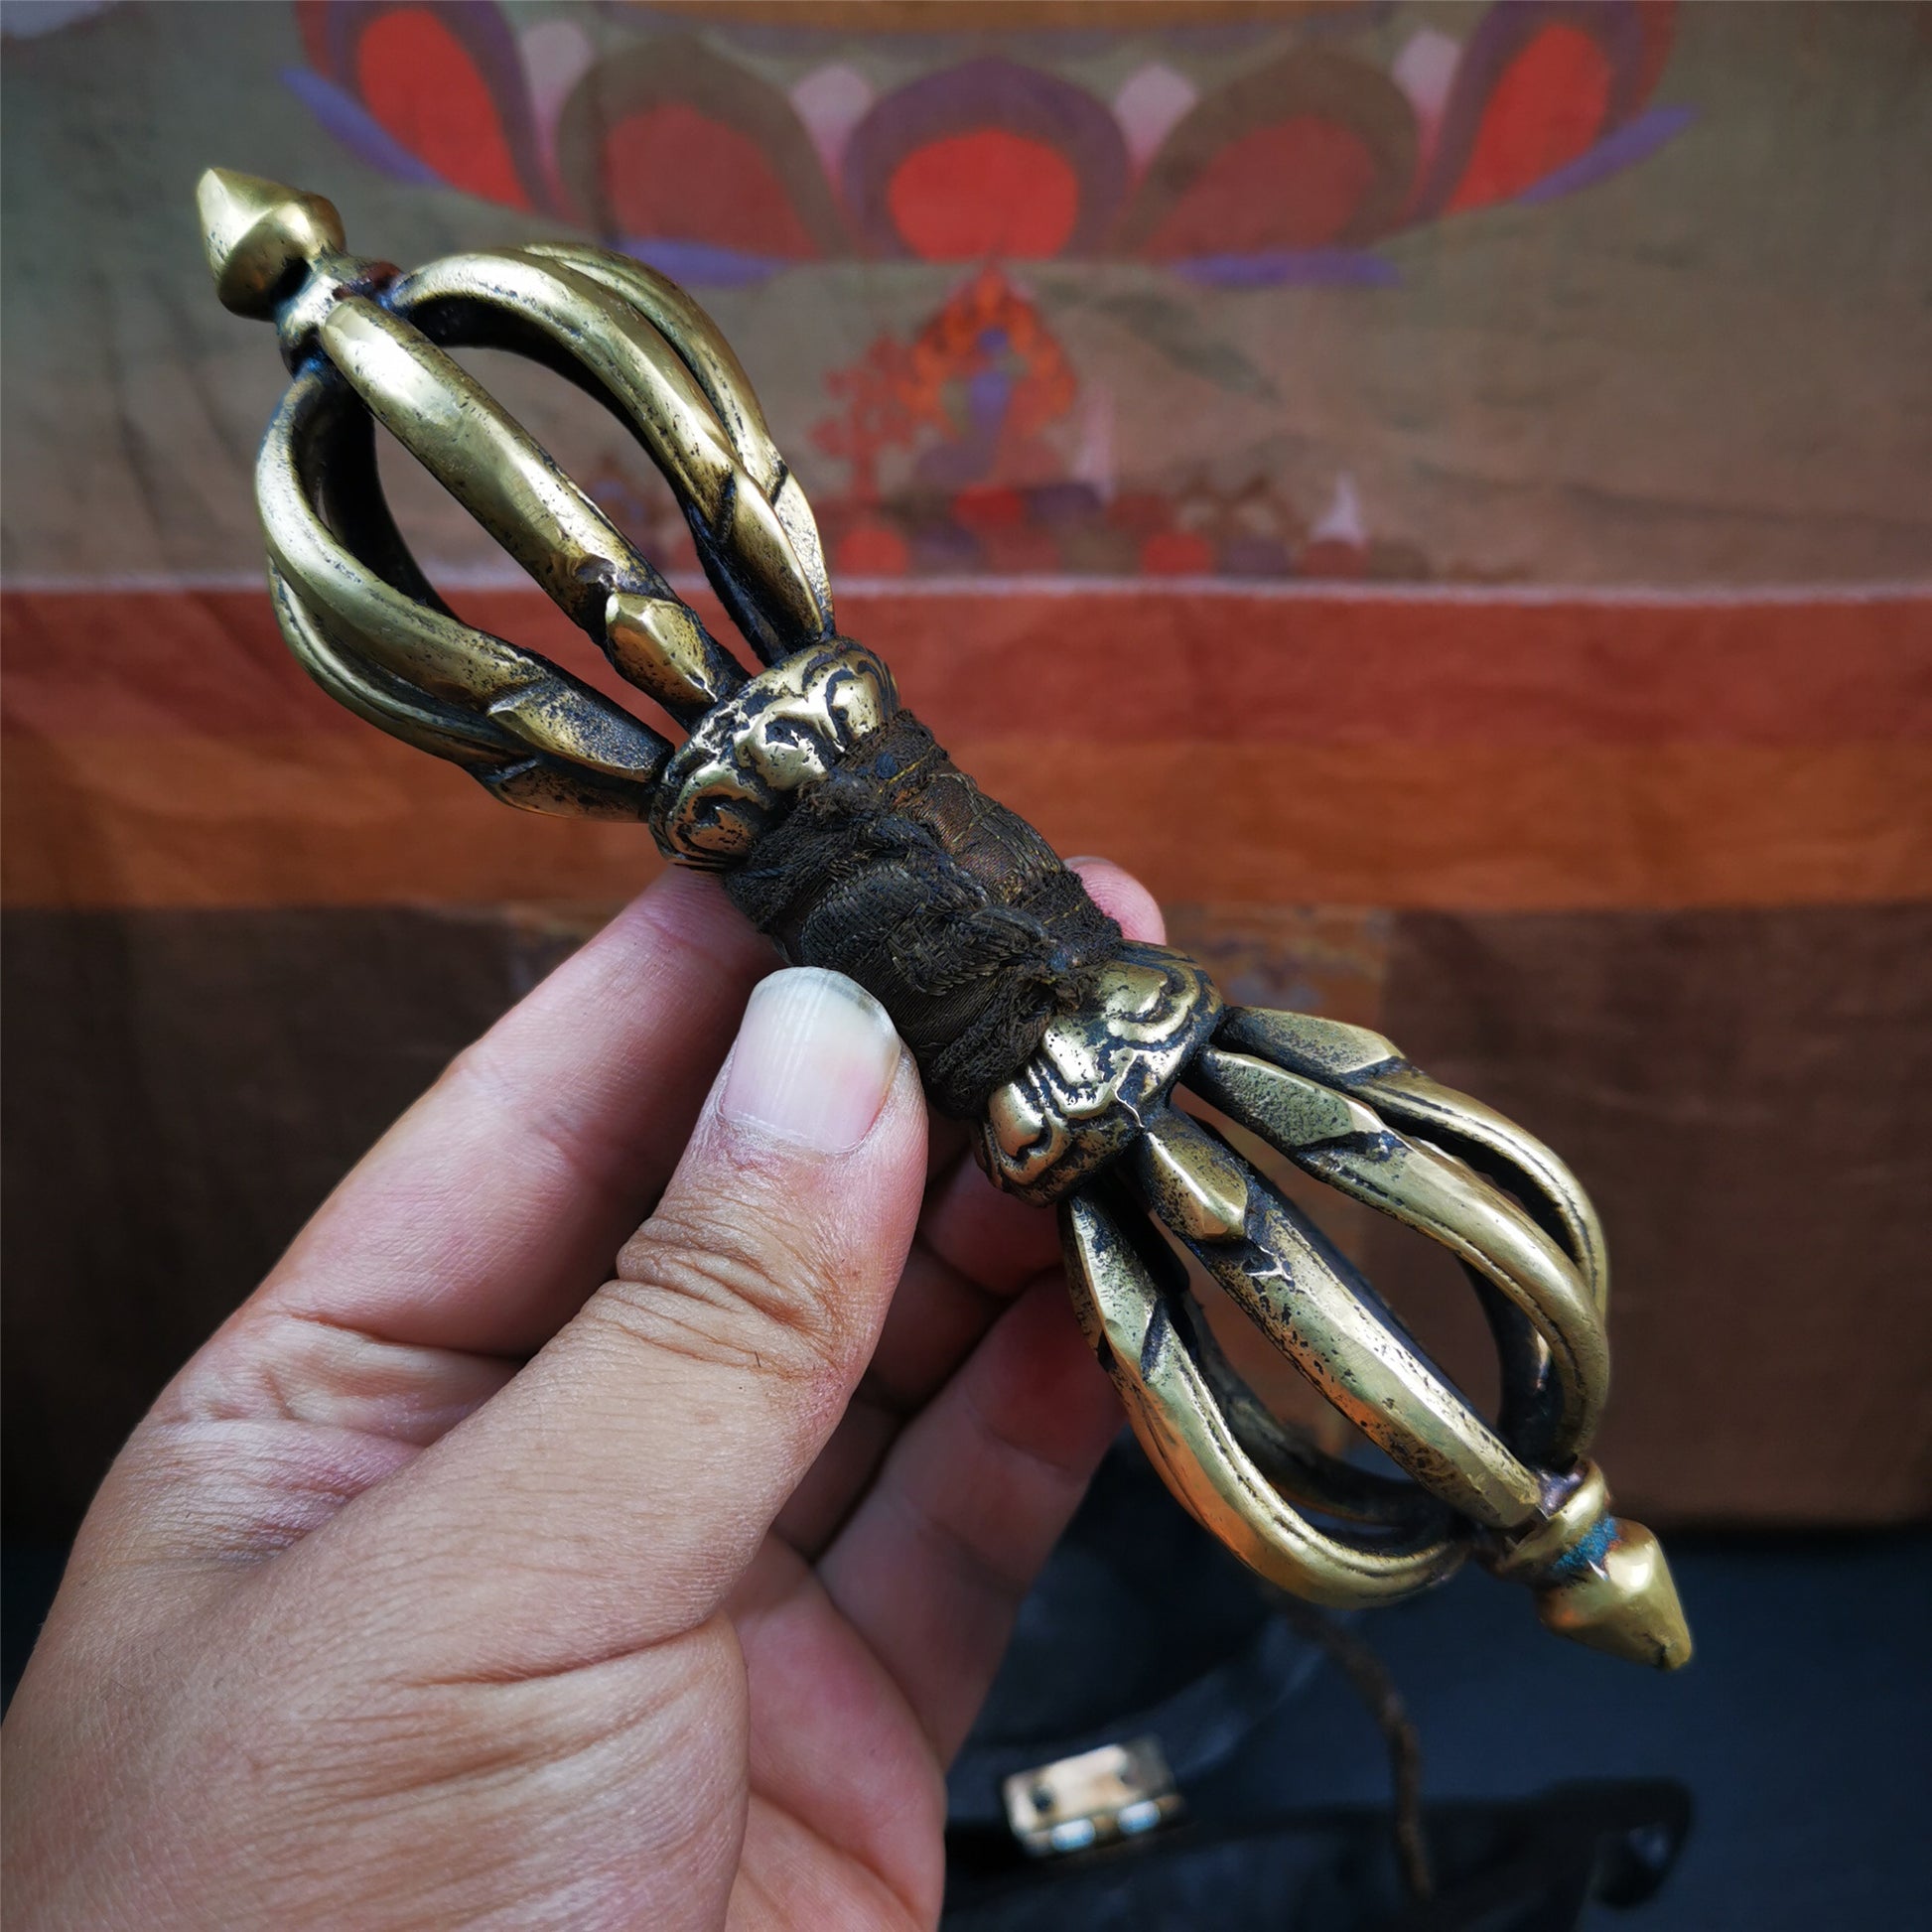 Gandhanra Powerful Vintage Vajra Dorje with Wooden Case ,Tibetan Tantric Buddhism (Vajrayana) Ritual Implement,handmade in Nepal,use traditional techniques and materials. The Nine-pronged vajra is made of brass, and the outer box is made of wood.